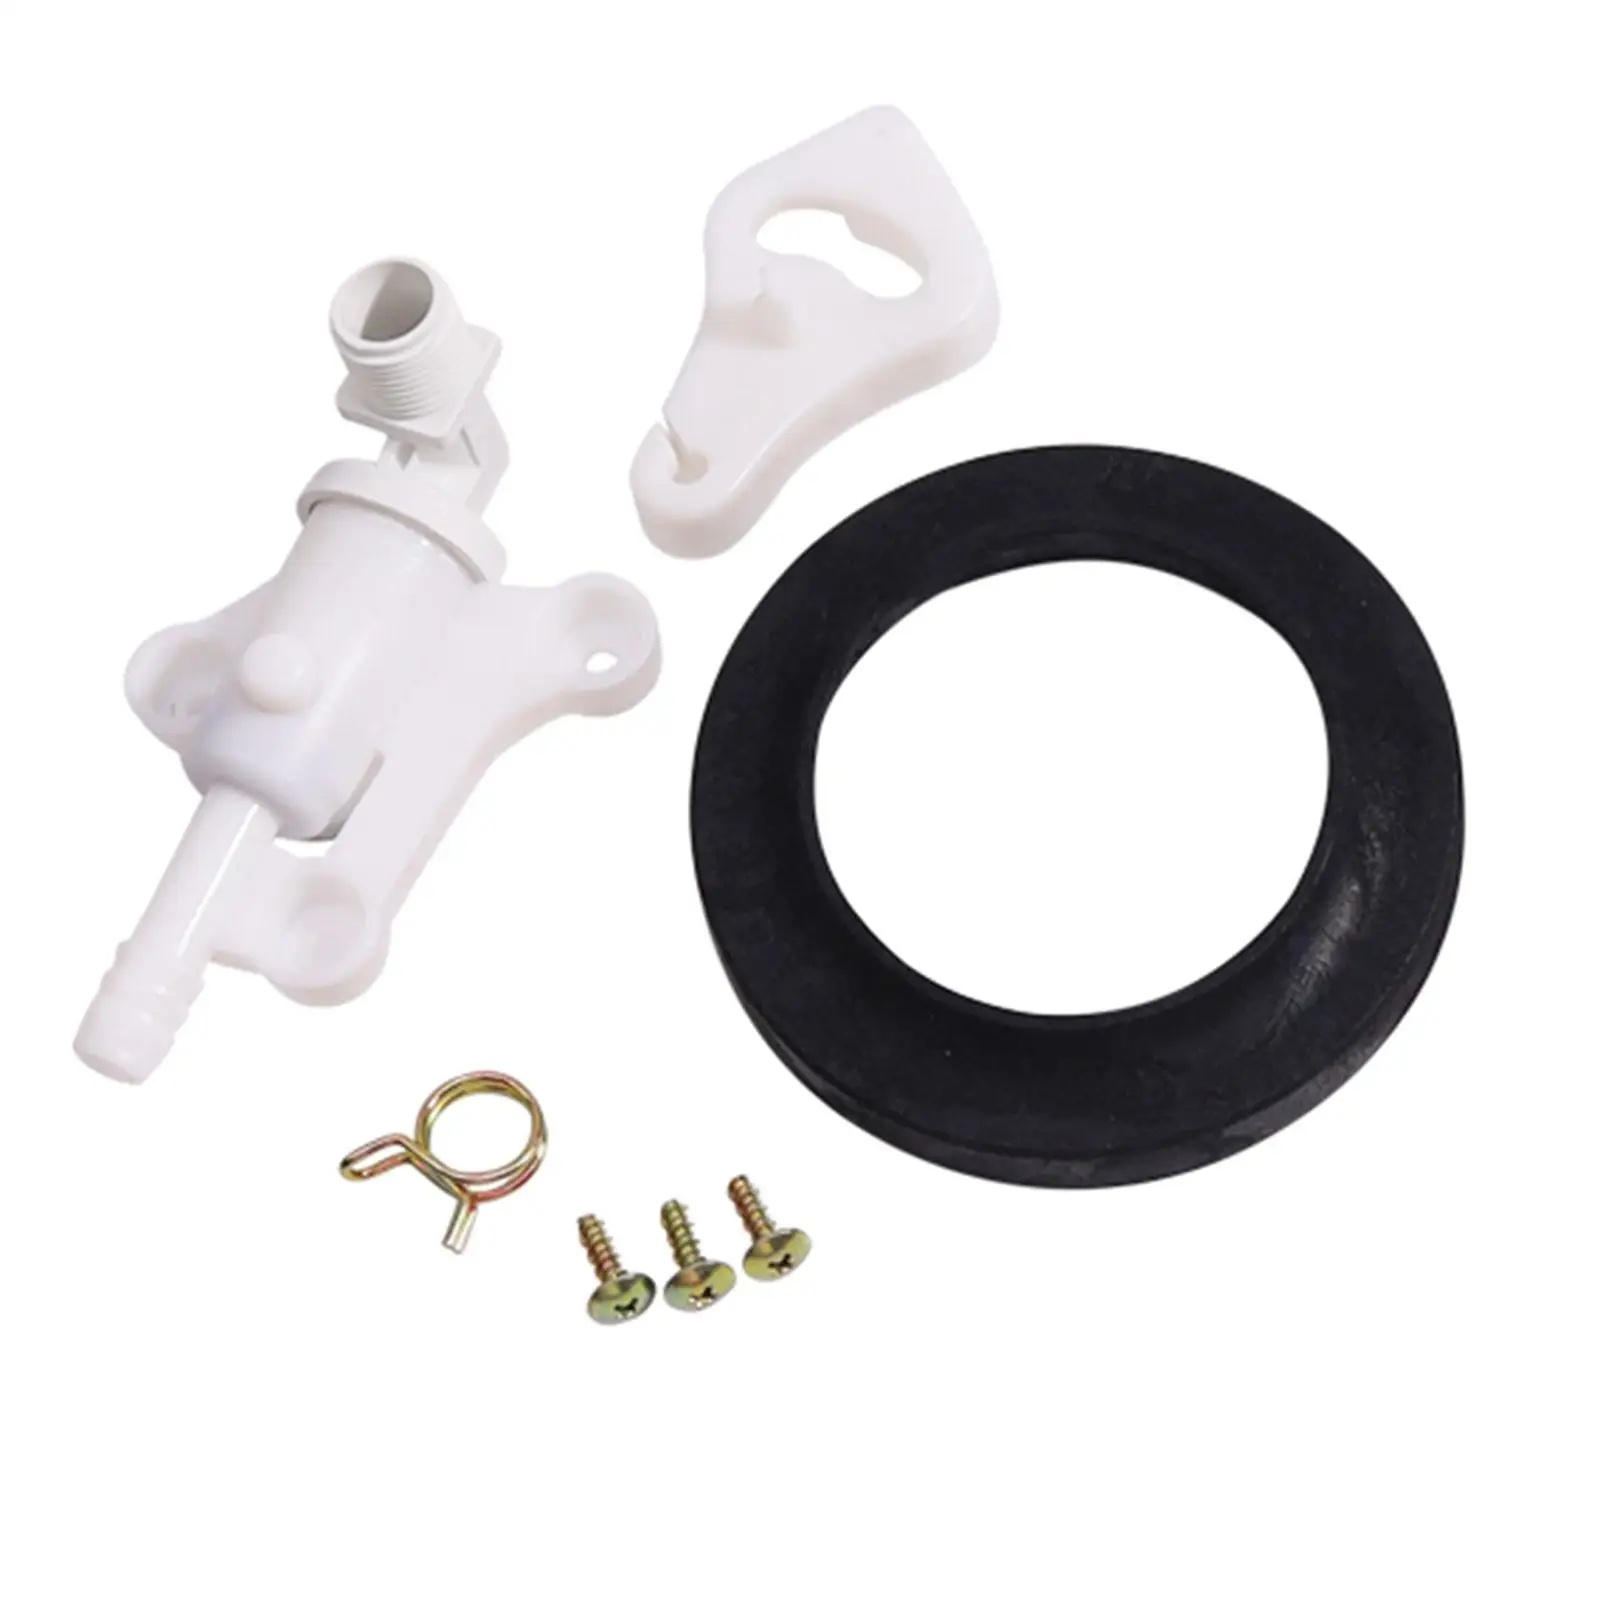 34100 RV Water Valve for Style Lite Toilets Accessory Replacements for Durable Easy to Install Convenient Practical